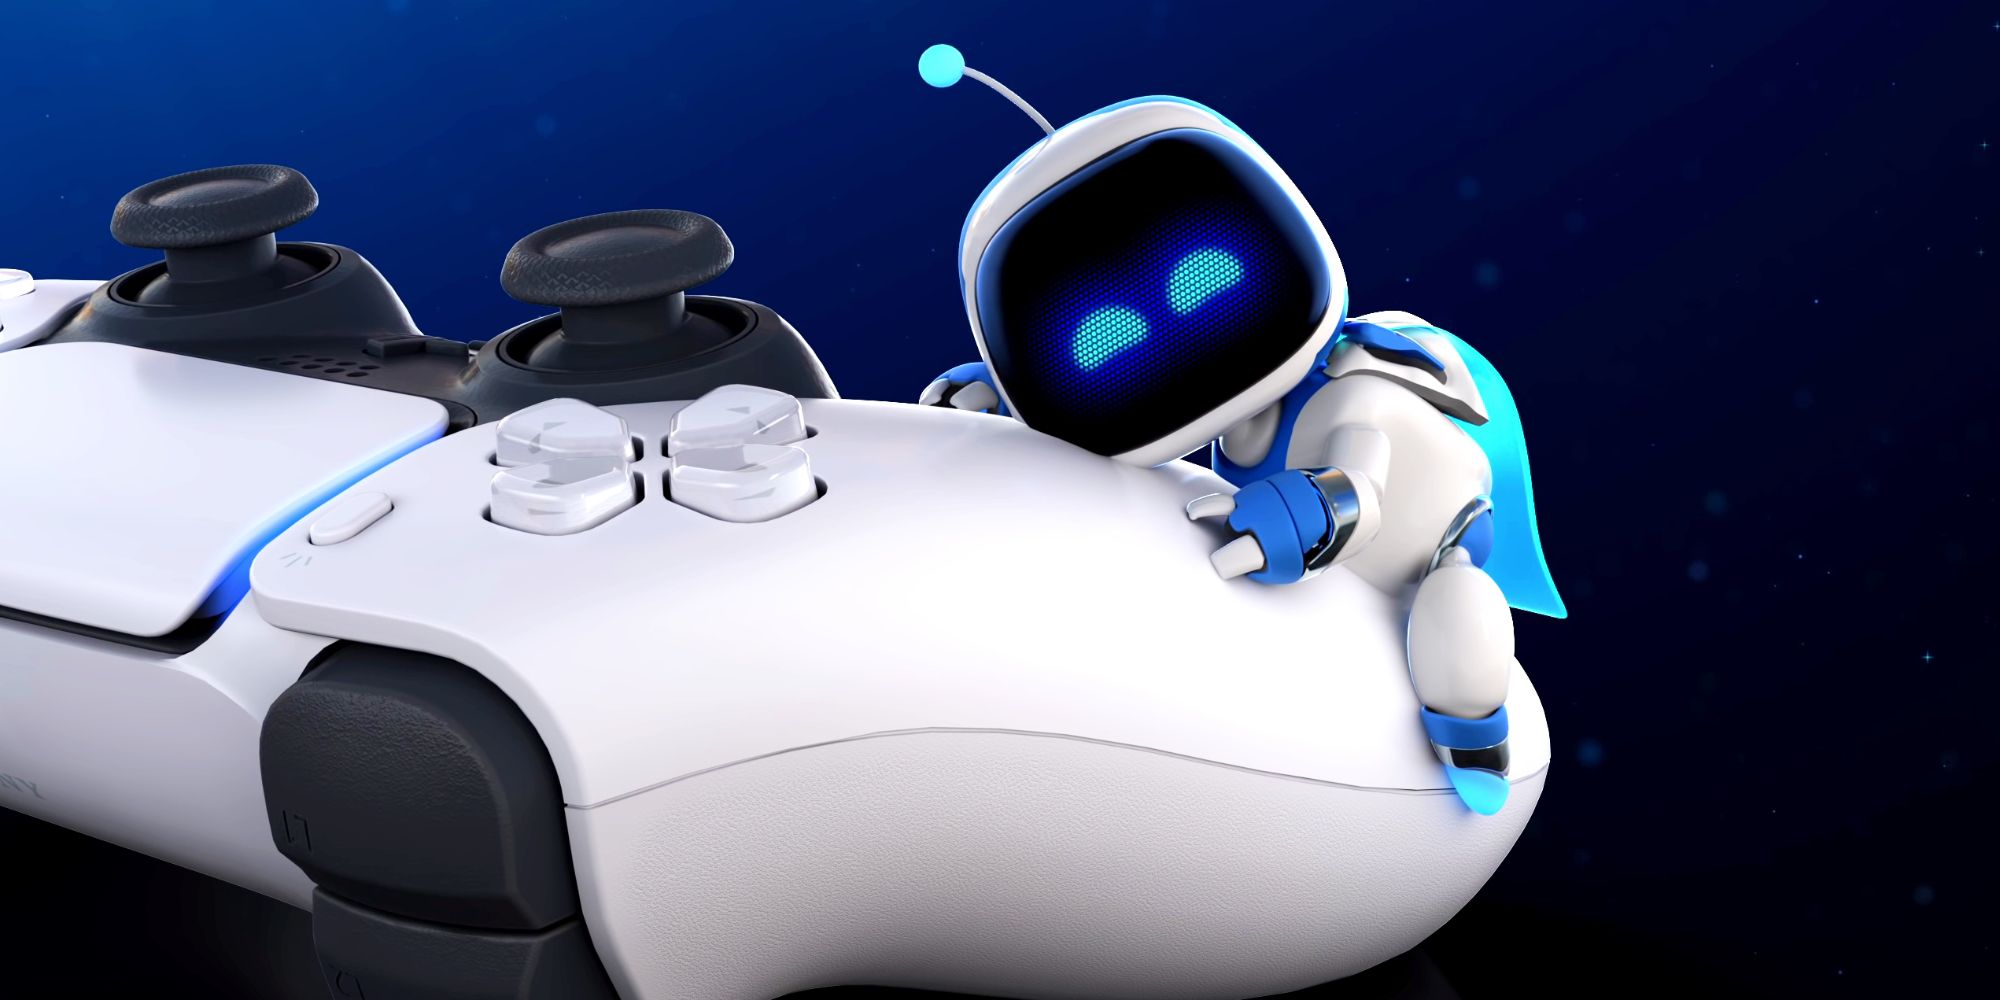 Astro Bot hugging the left handle of a DualSense controller, with a happy expression on its robotic screen face.